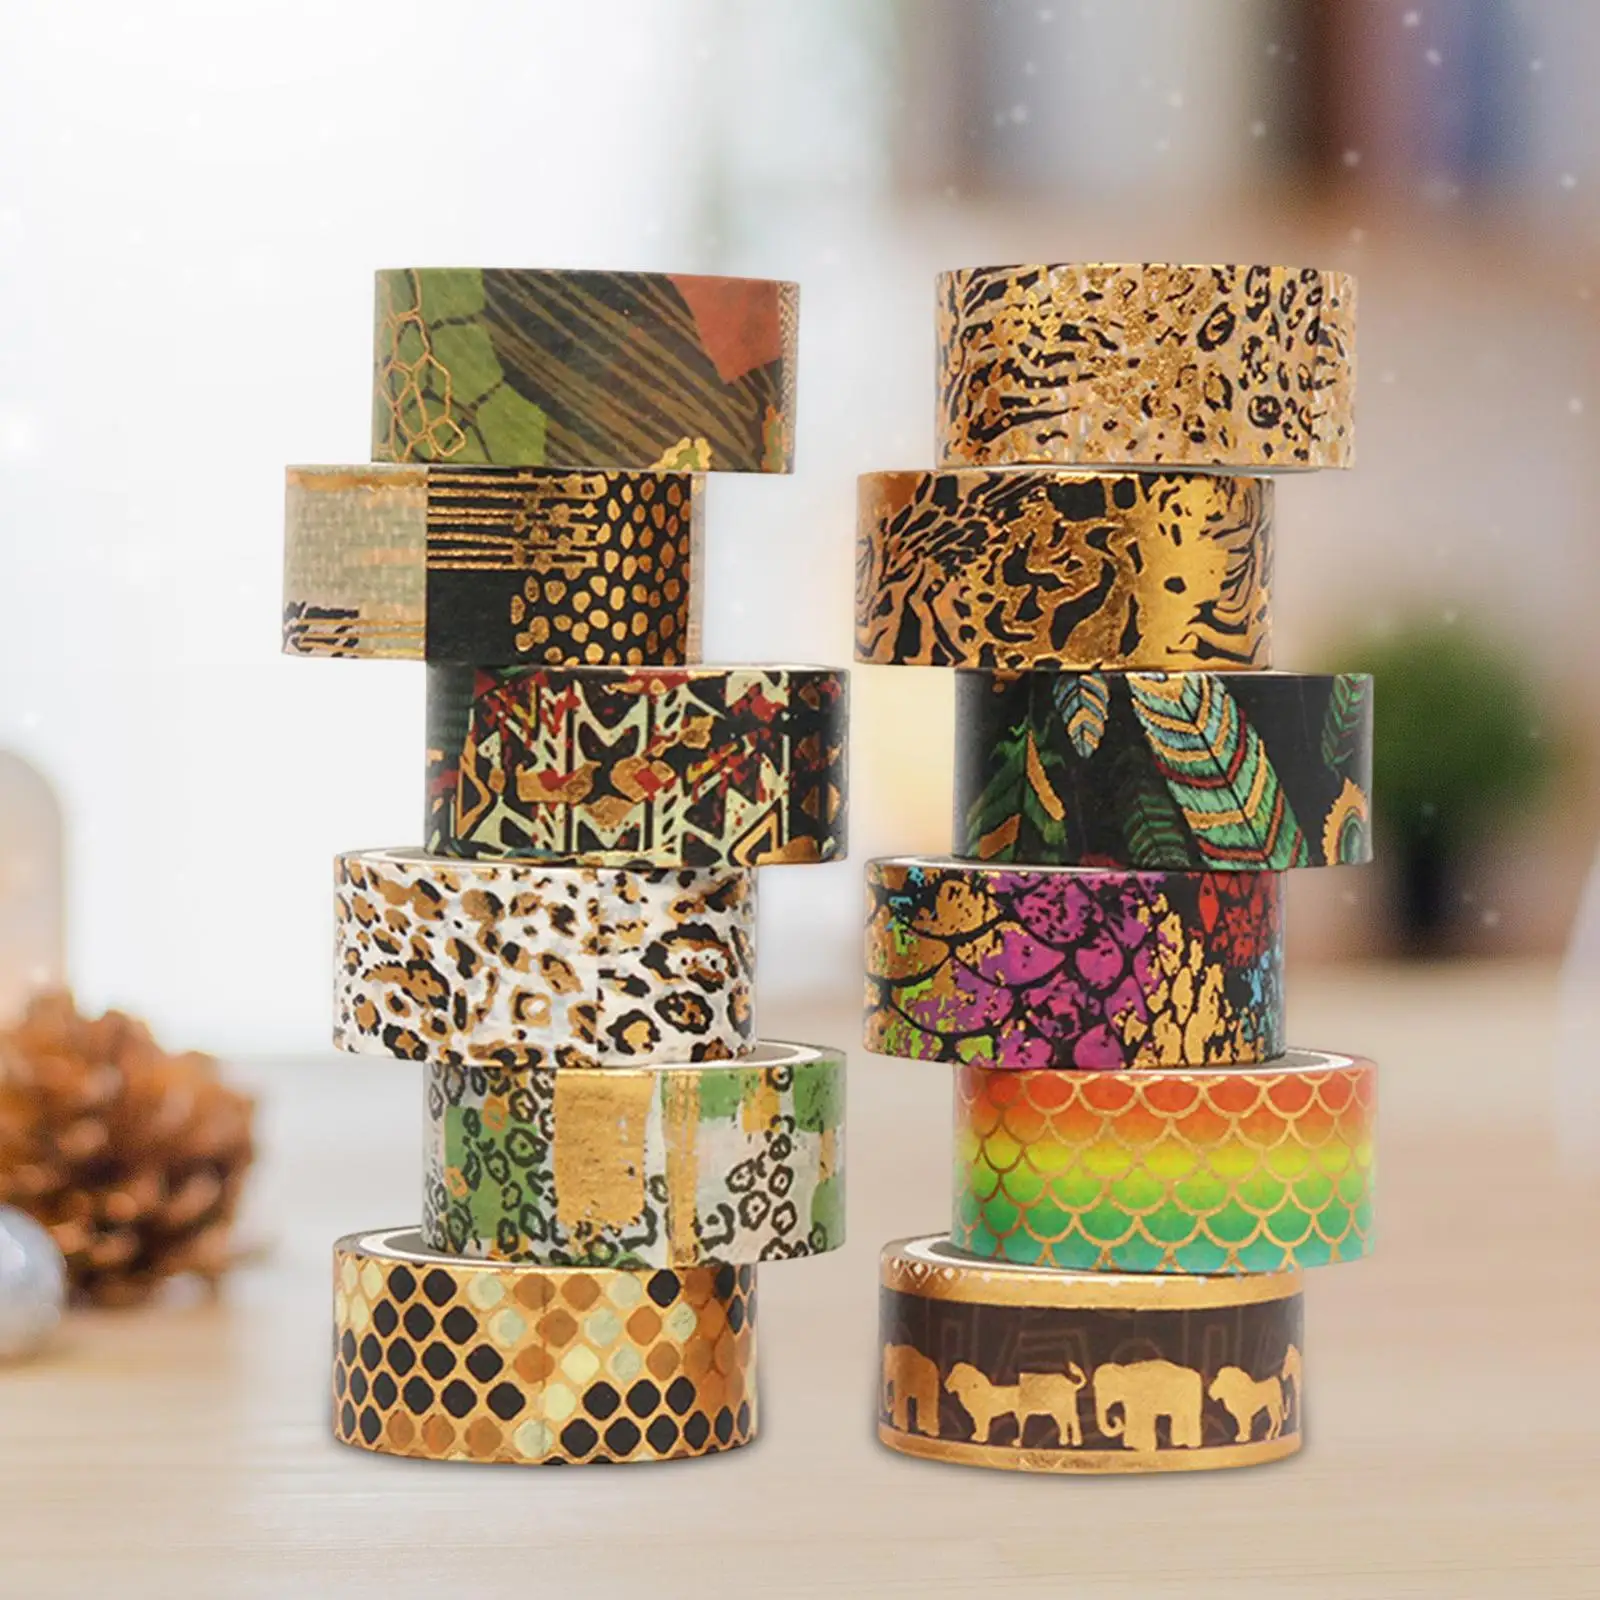 12 Pieces 15mm Wide Washi Tapes Masking Tapes Vintage Style Decorative for Scrapbooking